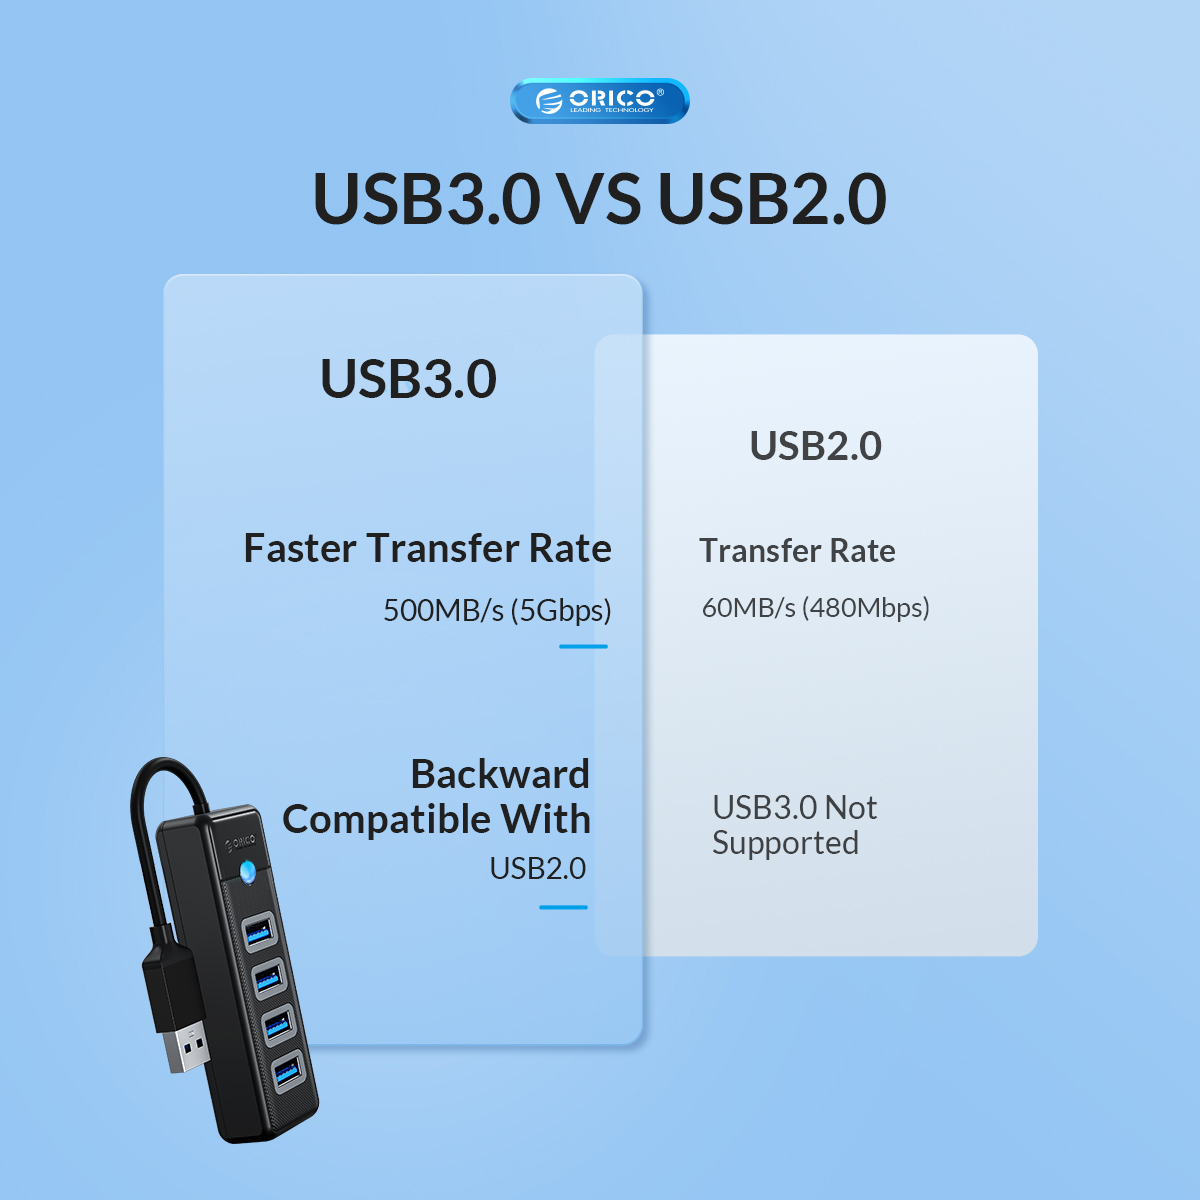 A large marketing image providing additional information about the product Orico 4 Ports USB-A To USB3.0 HUB - Additional alt info not provided